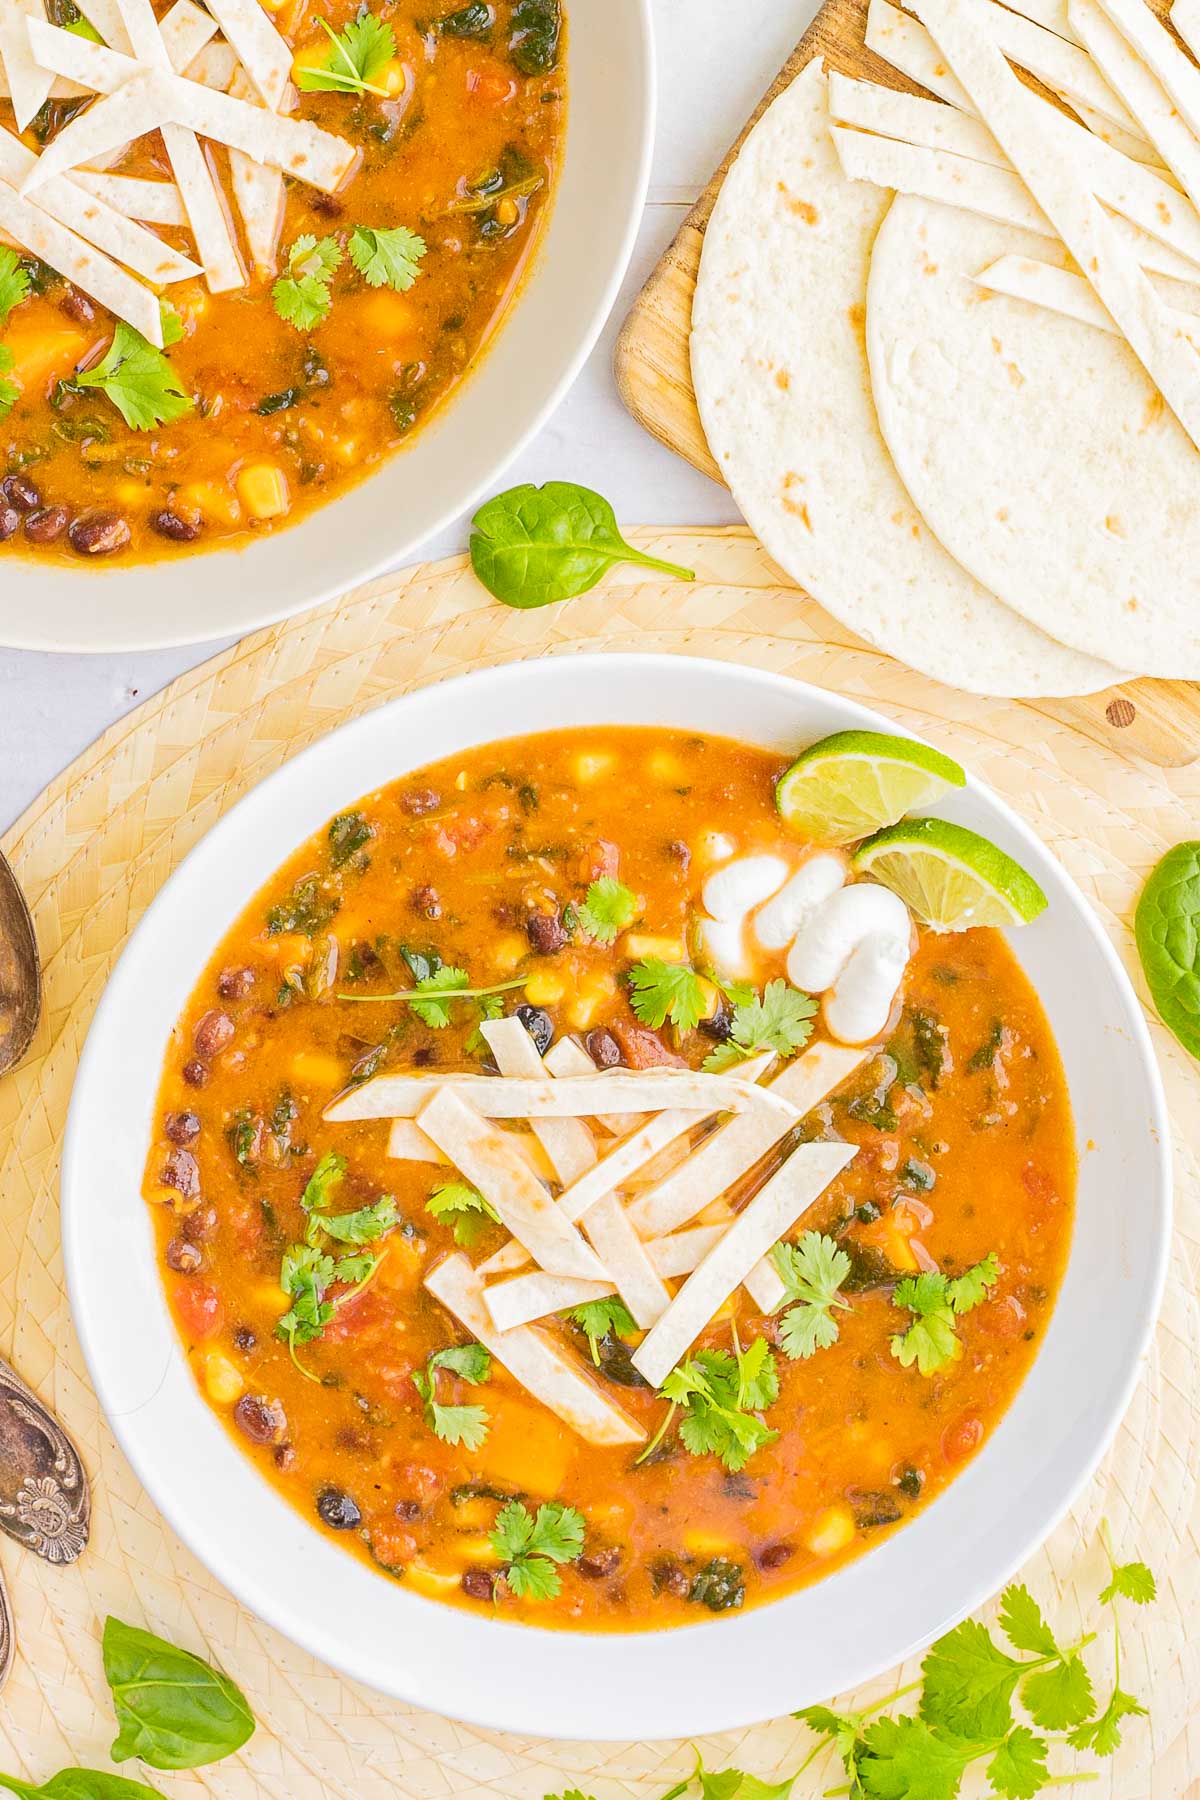 2 white bowls of orange soup loaded with beans, corn, and topped with tortilla strips and freshly chopped cilantro. More tortilla on the side. 